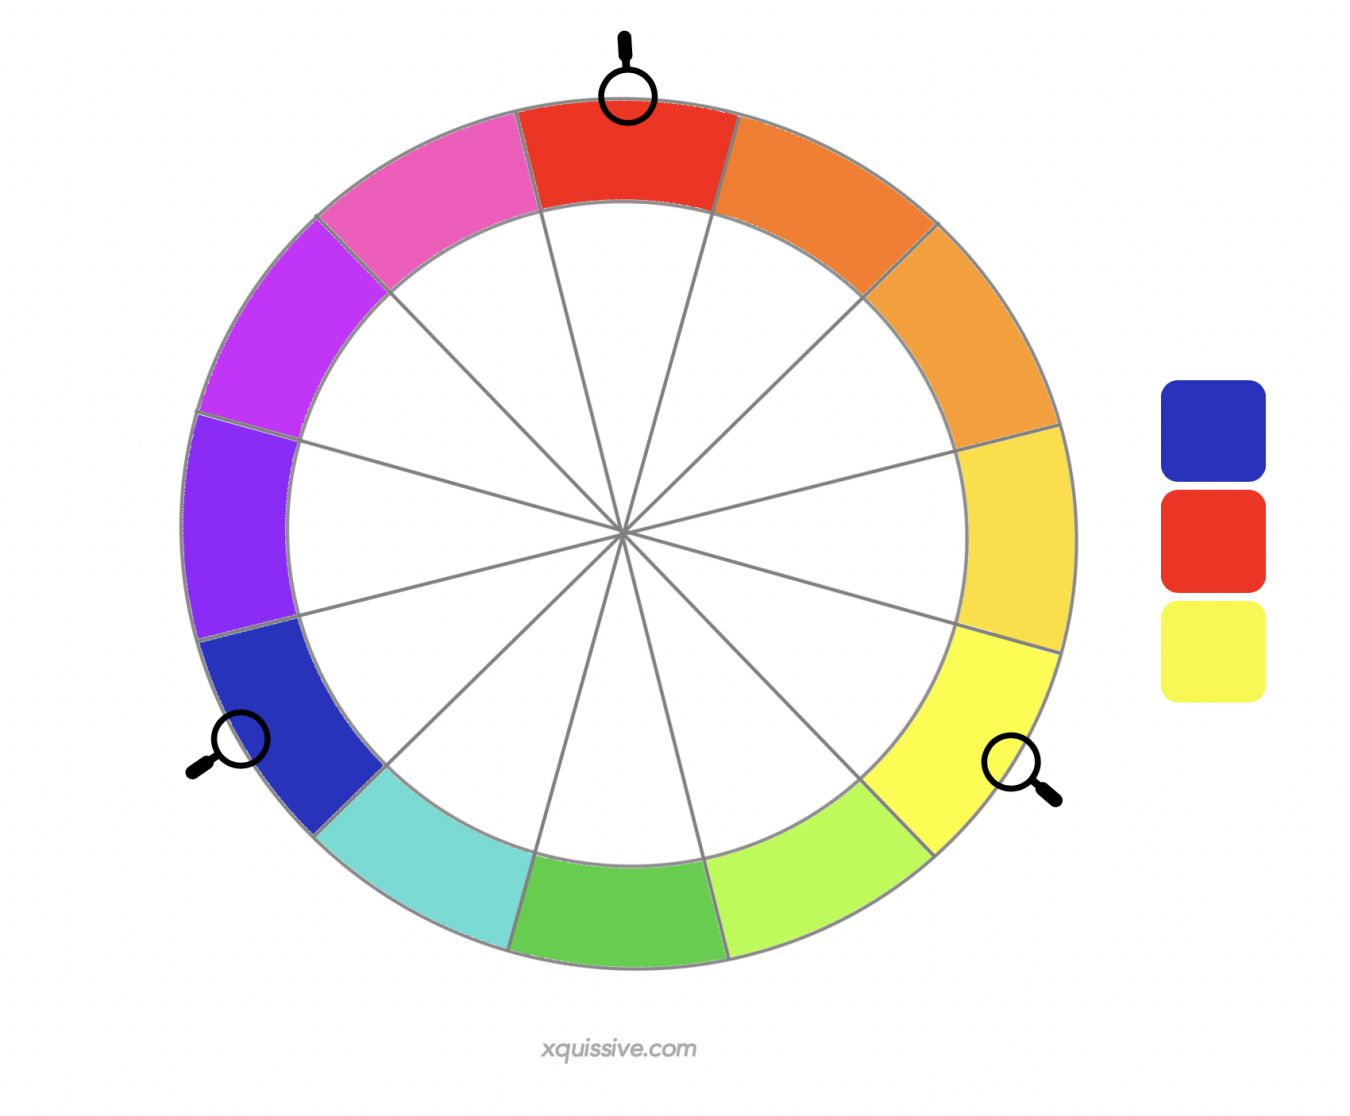 triadic colours - colour theory in design